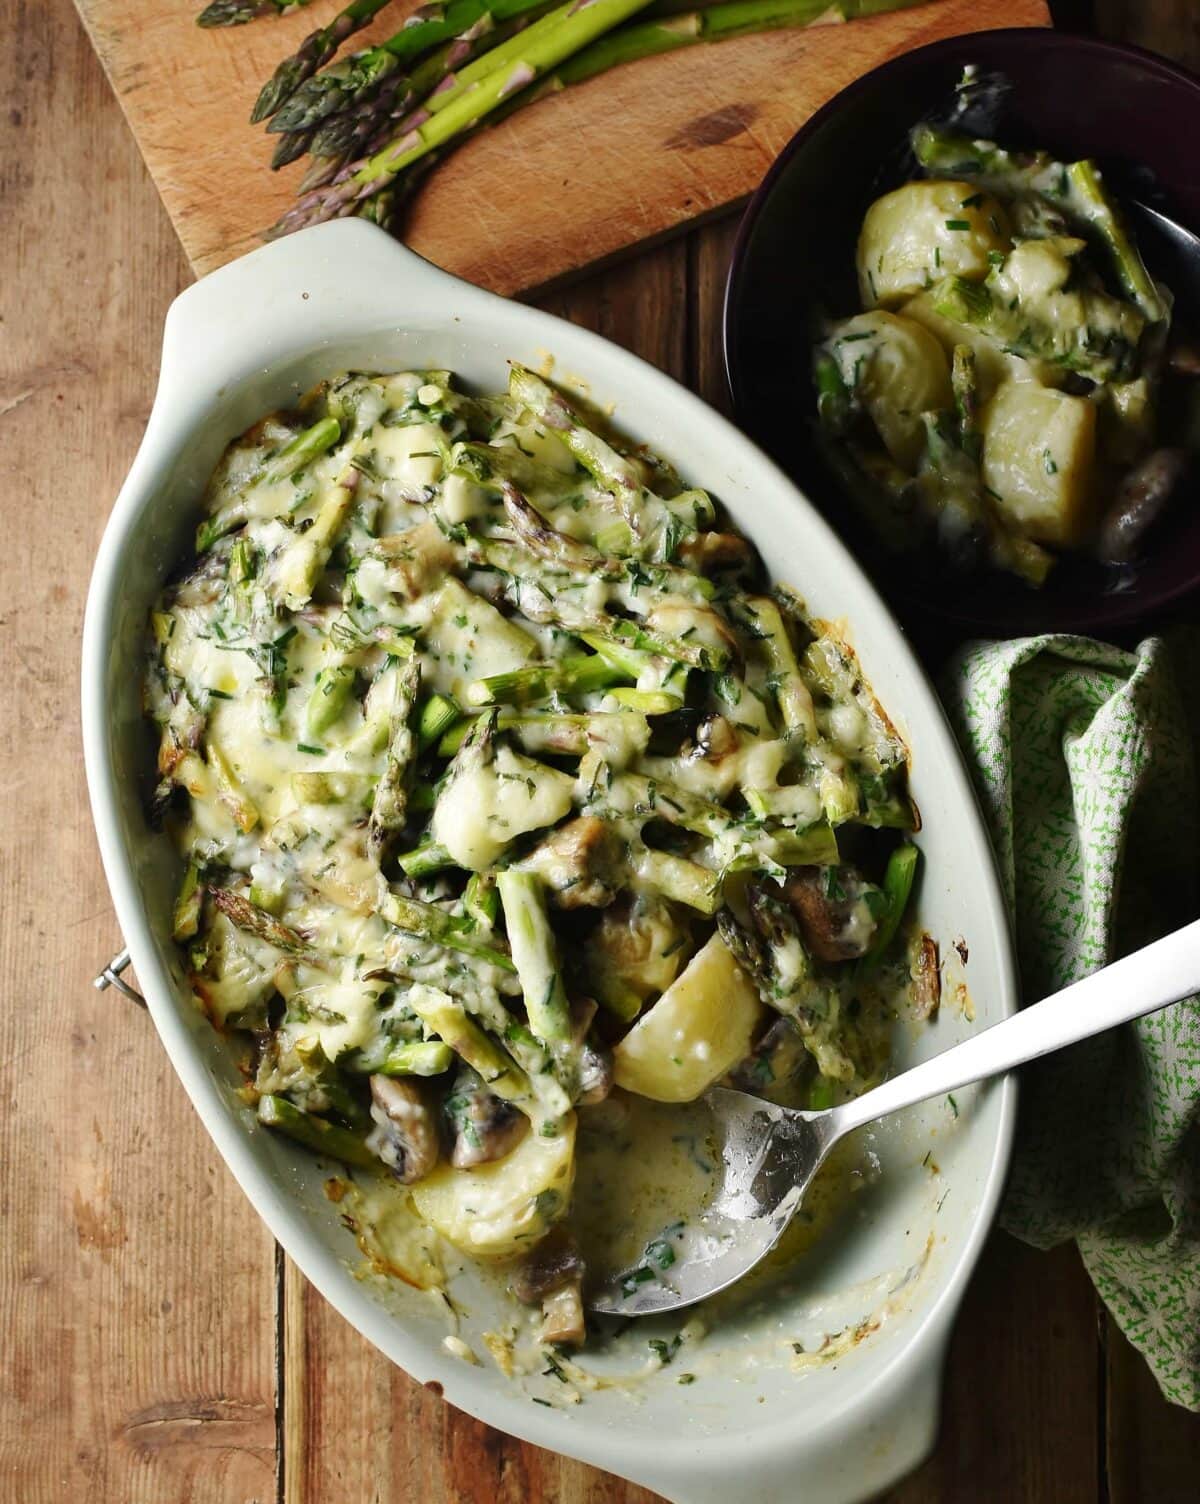 Asparagus, potatoes and mushrooms in creamy sauce with spoon in green oval dish, with green cloth to the right, potato mixture in dish and asparagus tips in background.